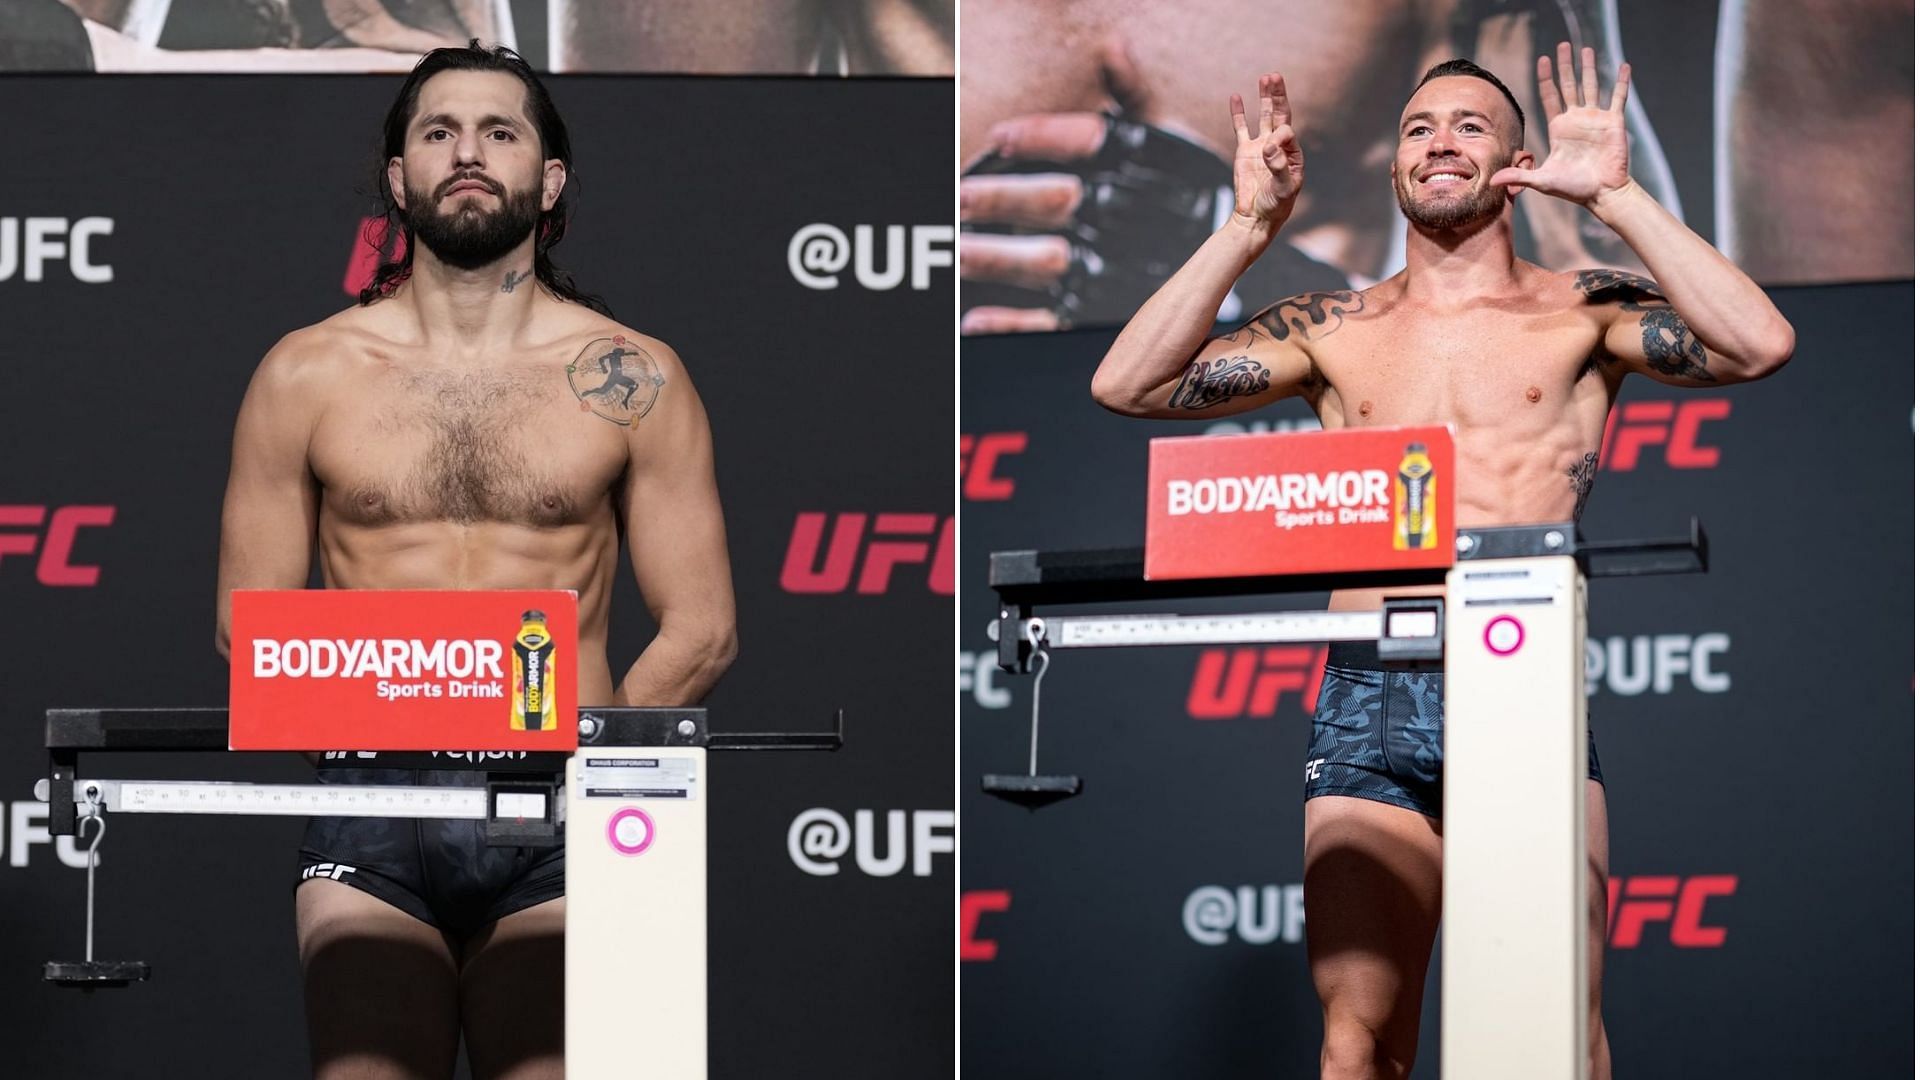 “Thank you Photoshop for the abs” – Jorge Masvidal hits back at Colby Covington’s claim that his physique was edited in UFC 272 poster